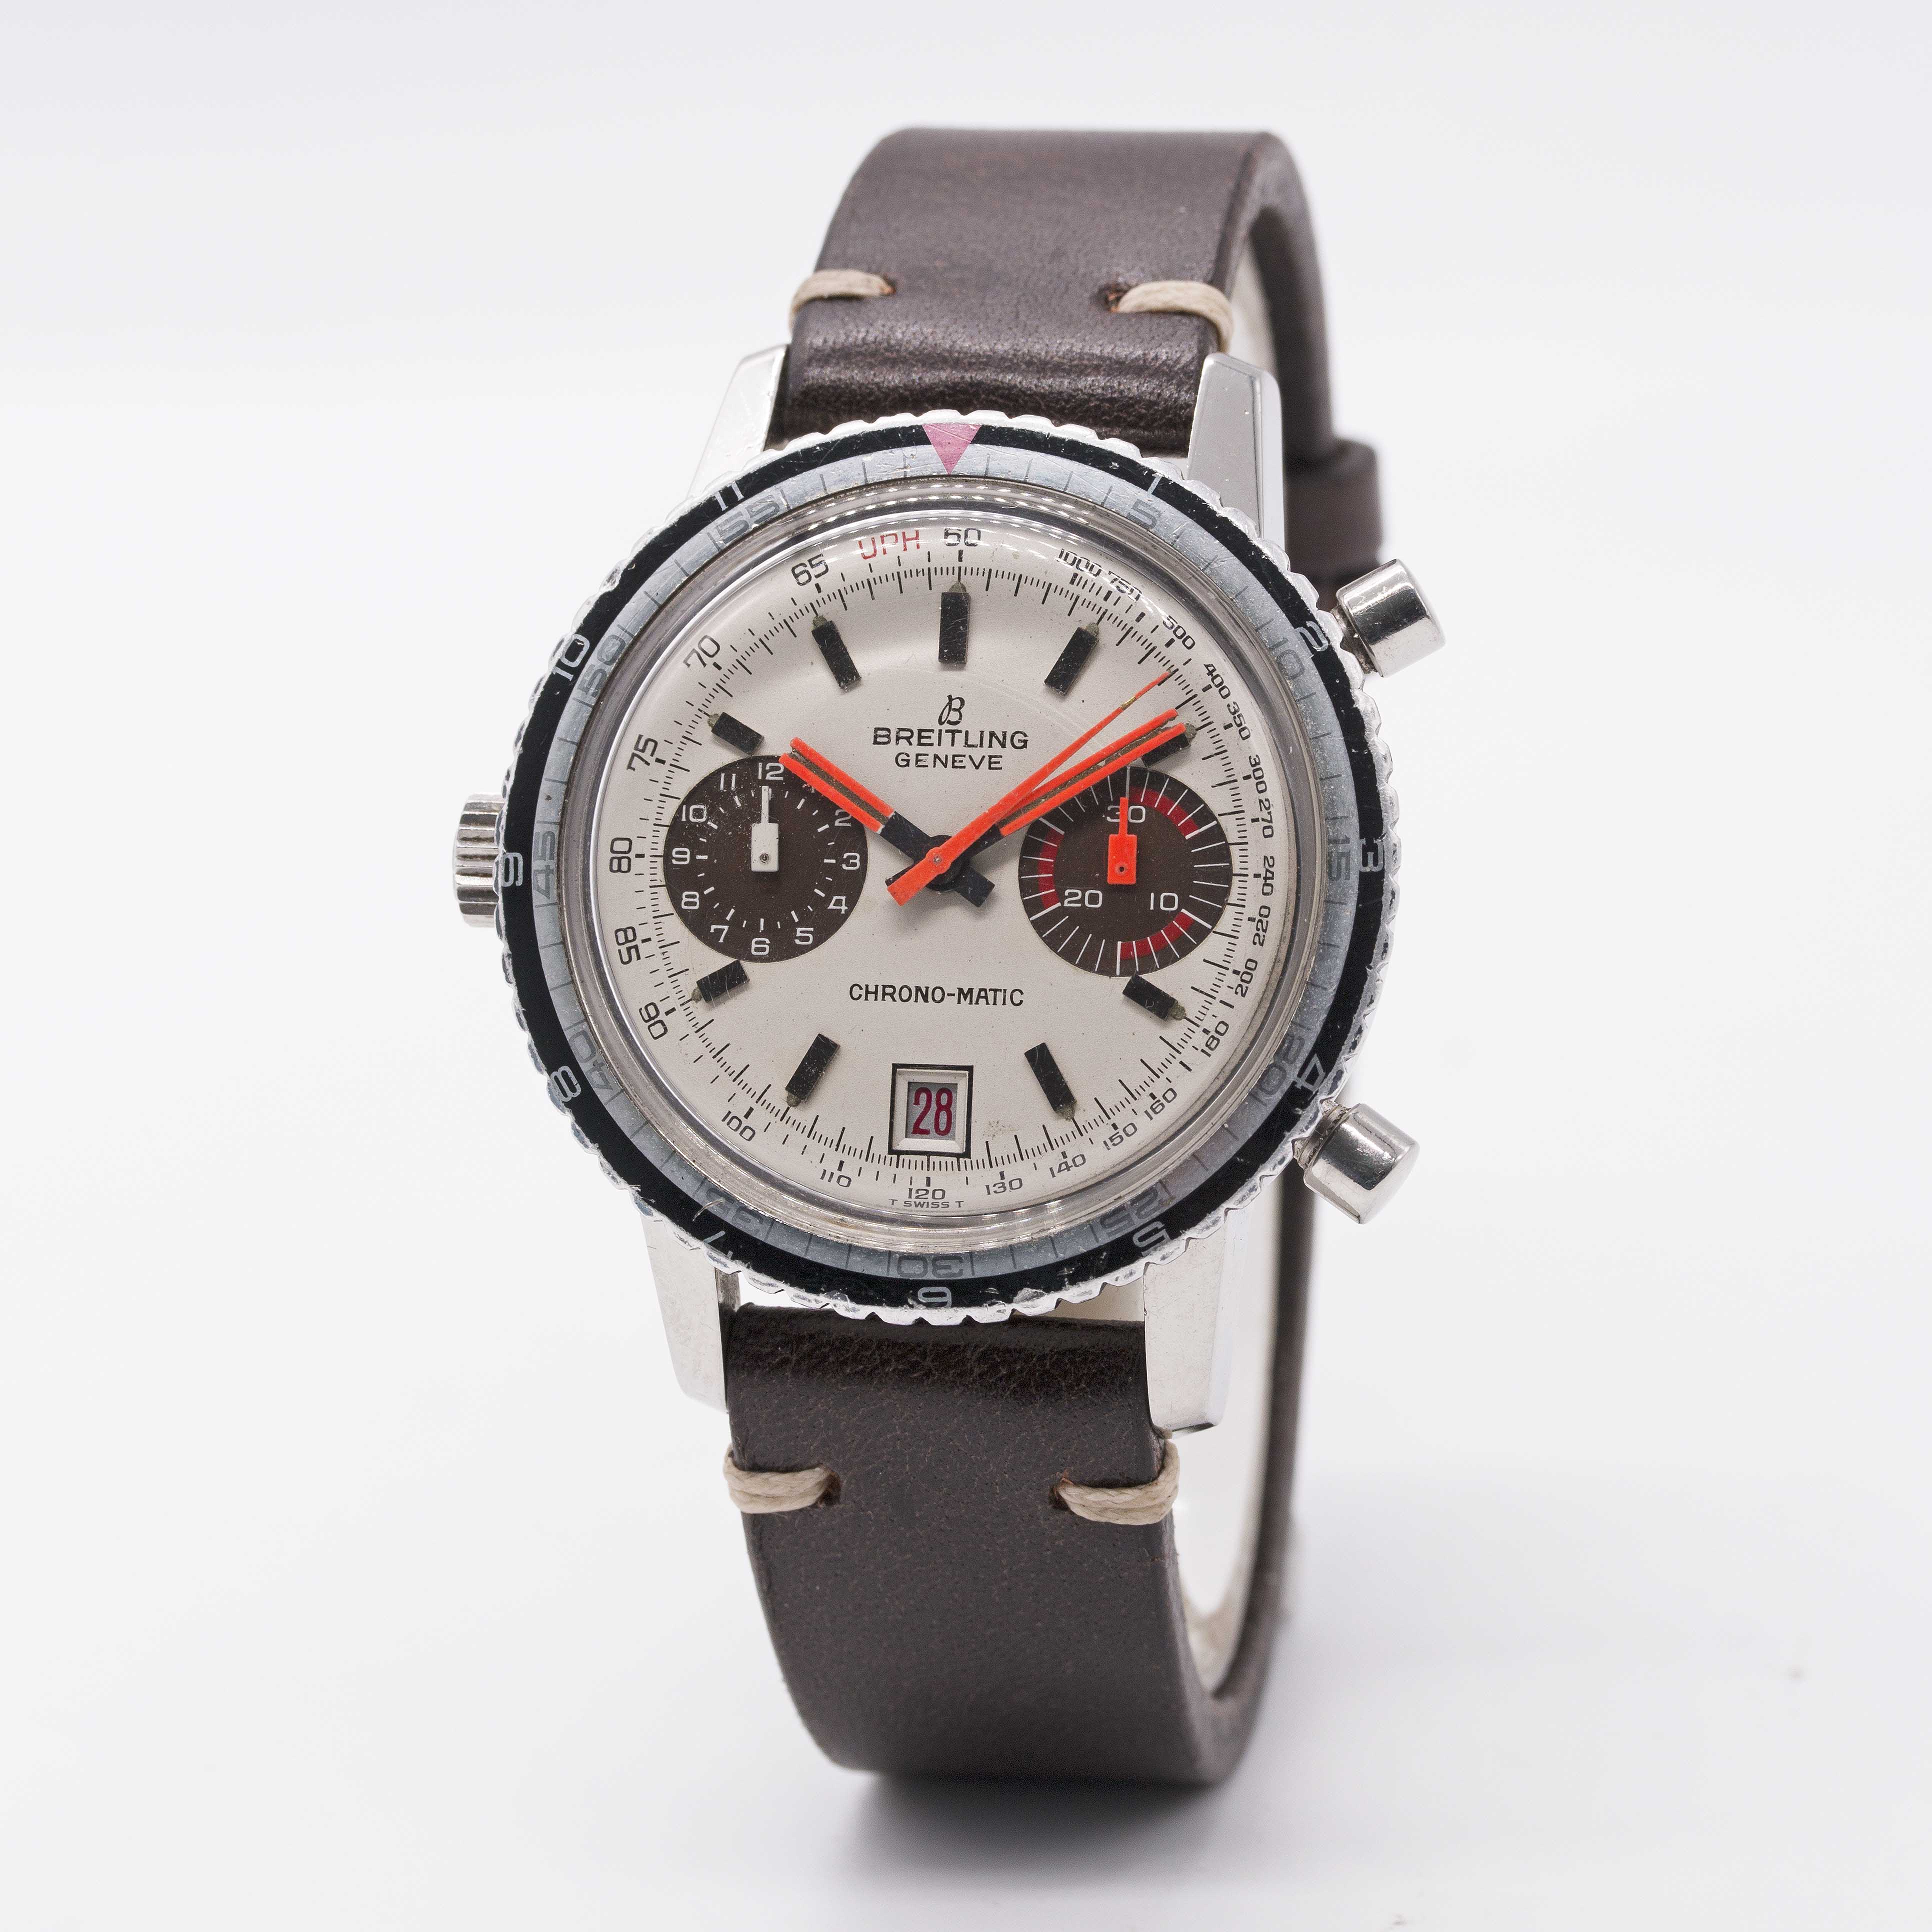 A GENTLEMAN'S STAINLESS STEEL BREITLING CHRONOMATIC CHRONOGRAPH WRIST WATCH CIRCA 1969, REF. 2110 " - Image 4 of 9